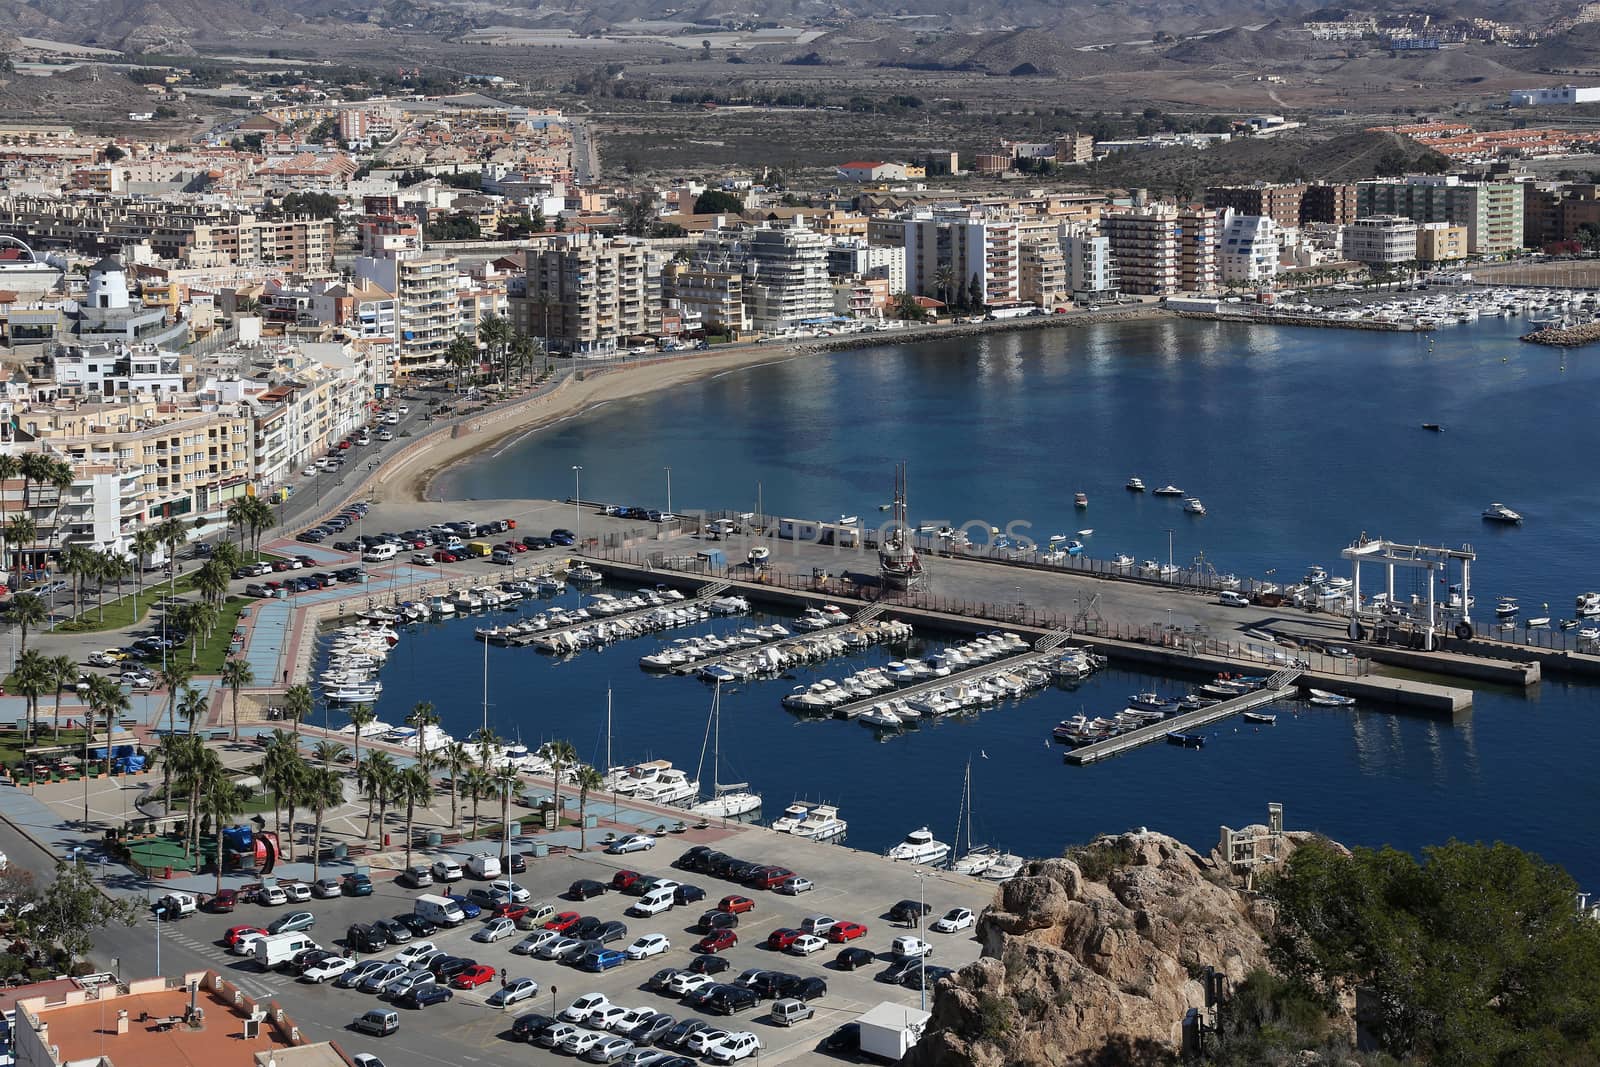 The Mediterranean port of Aguilas on the Costa Calida in Murcia in southeastern Spain